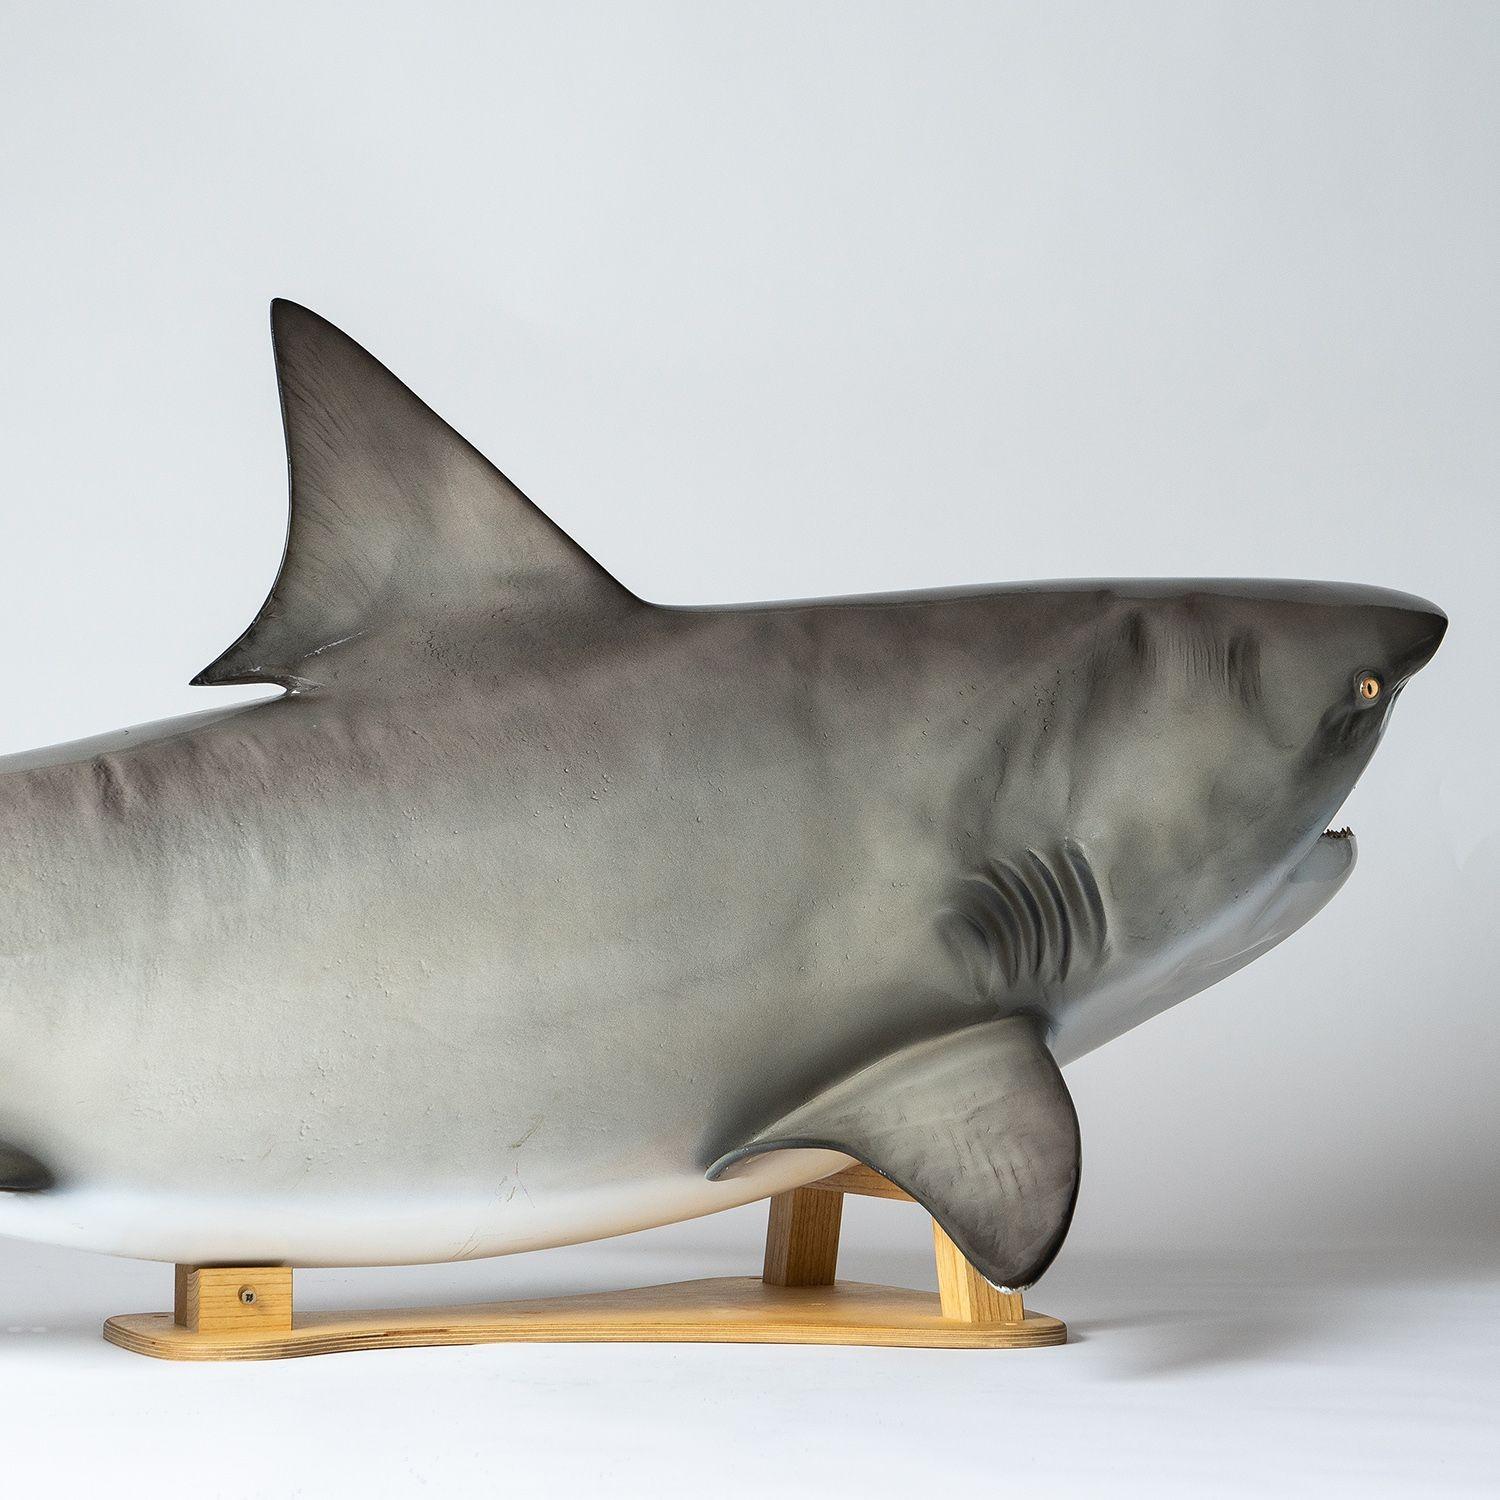 Vintage Museum-Quality Life-Size Model of a Bull Shark 9